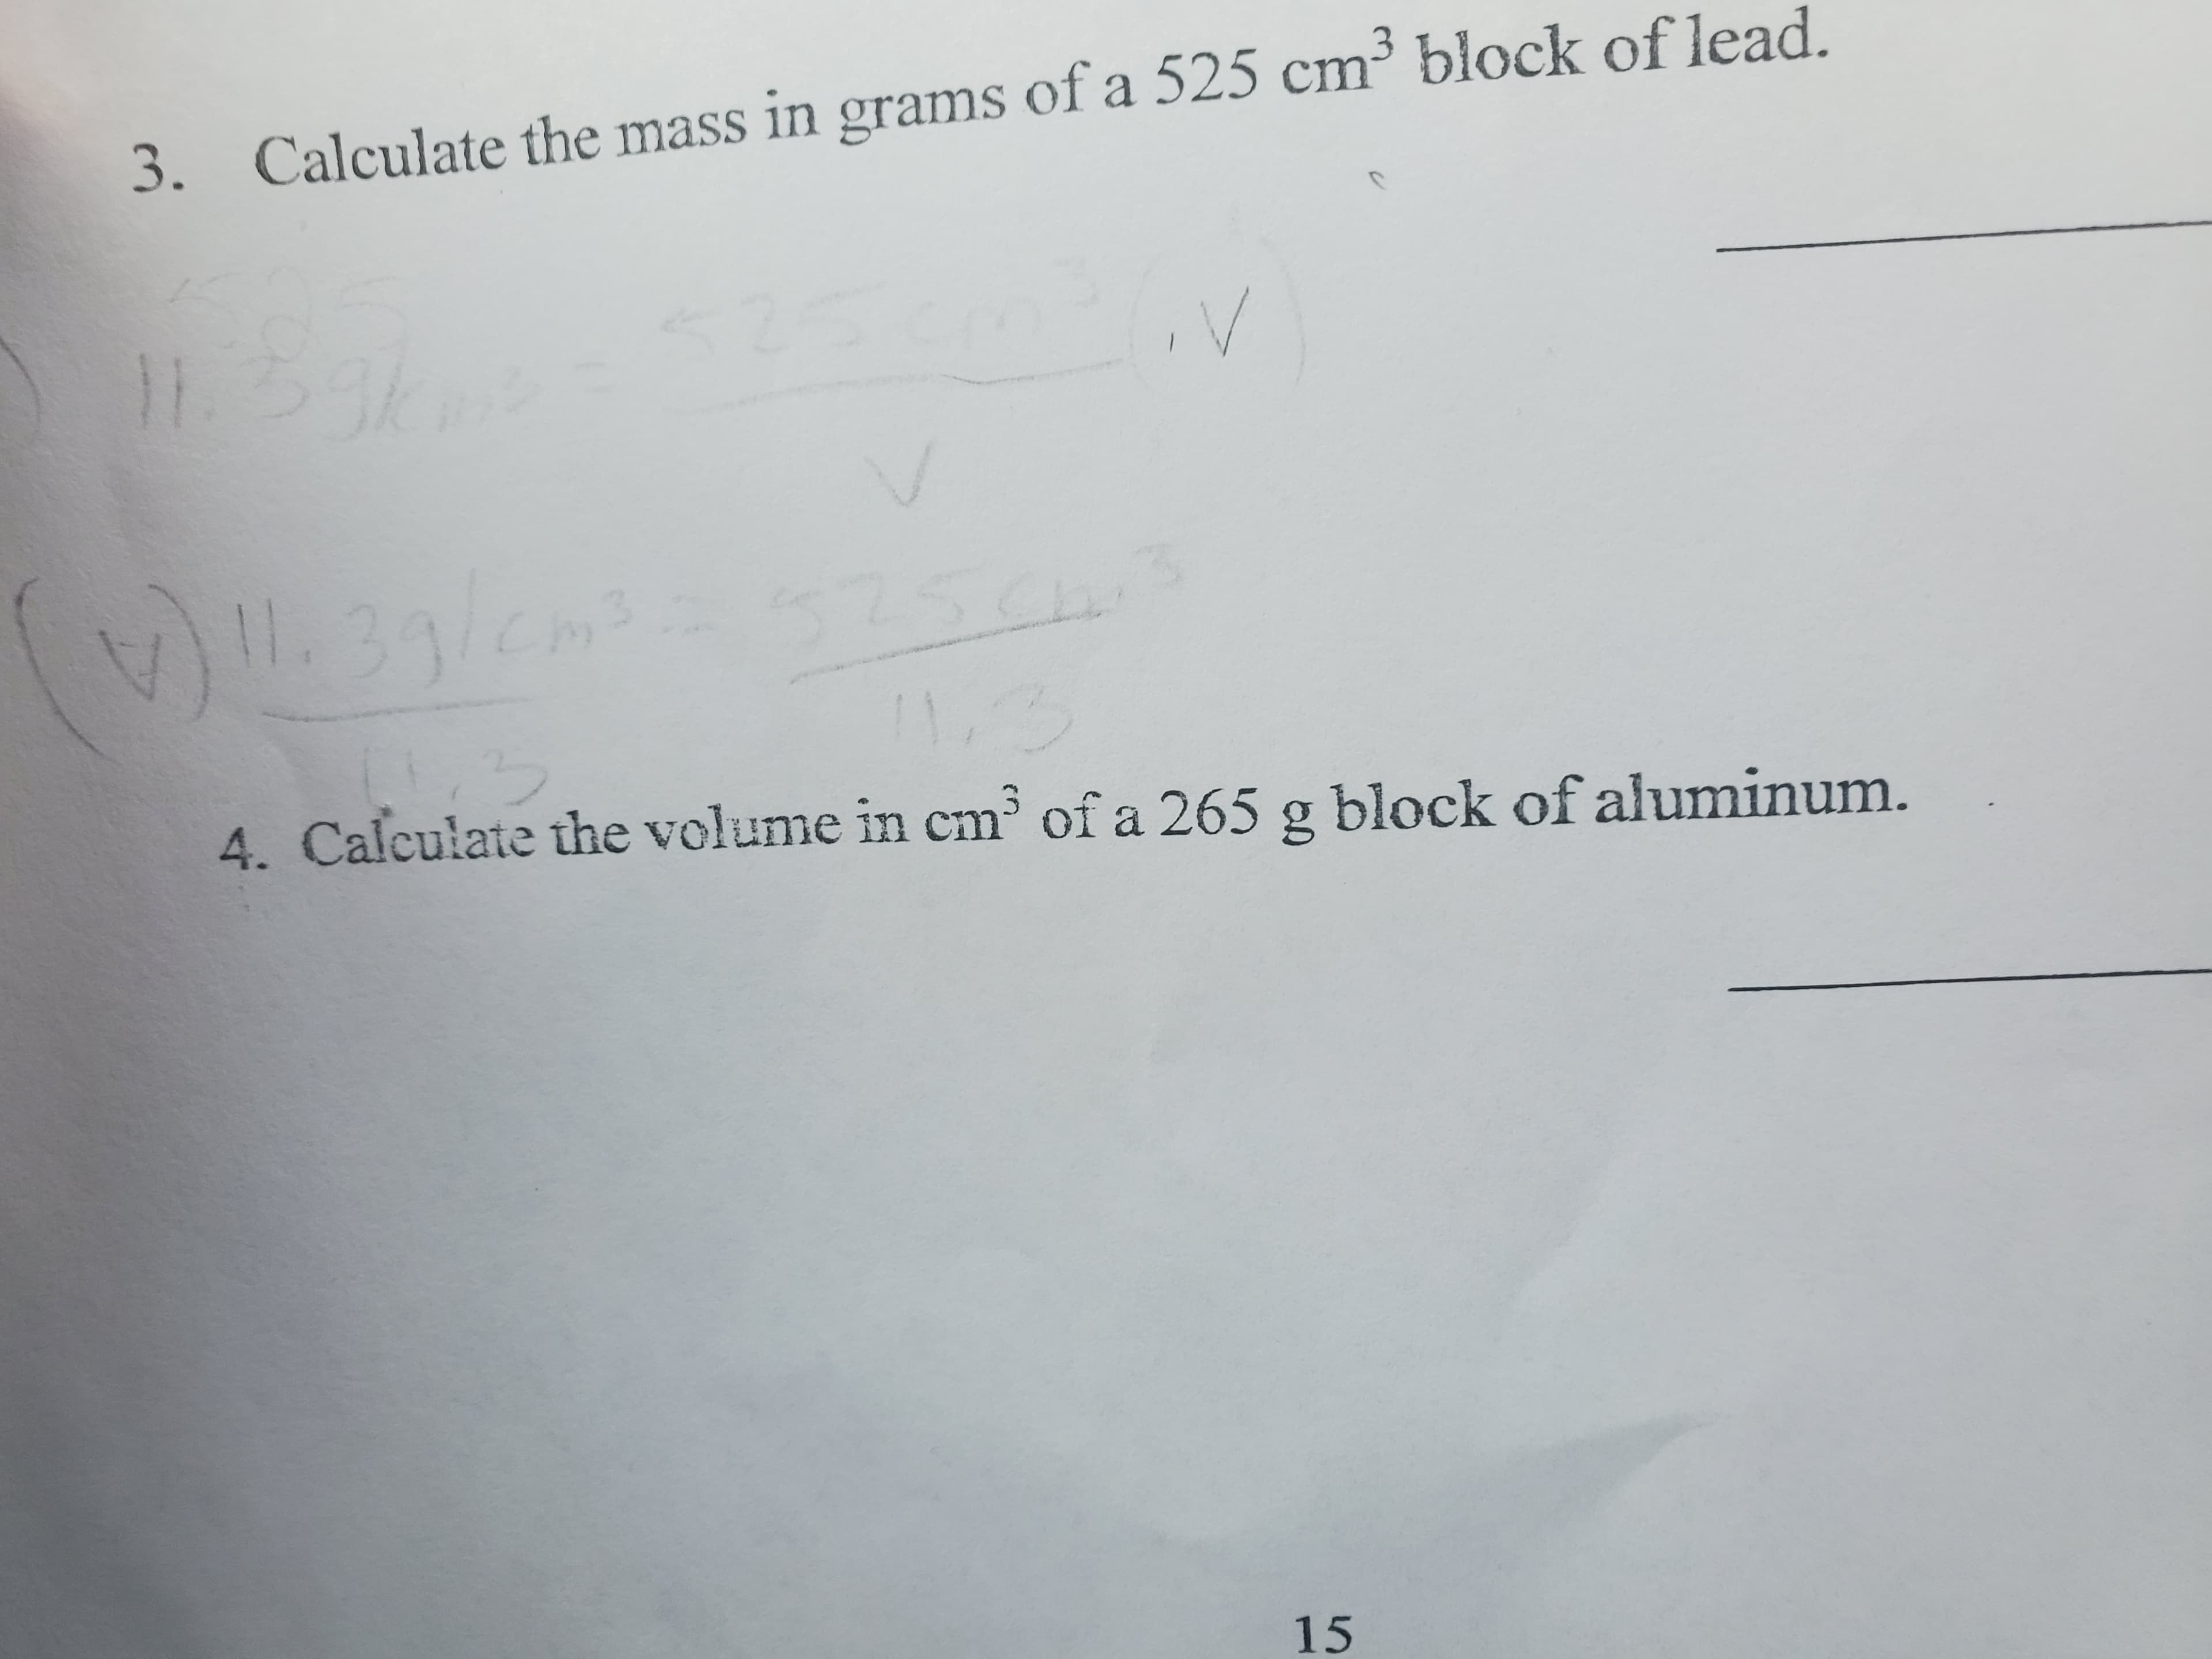 3. Calculate the mass in grams of a 525 cm³ block of lead.
1.39/c
575ch
3.
4. Calculate the volume in cm³ of a 265 g block of aluminum.
15
